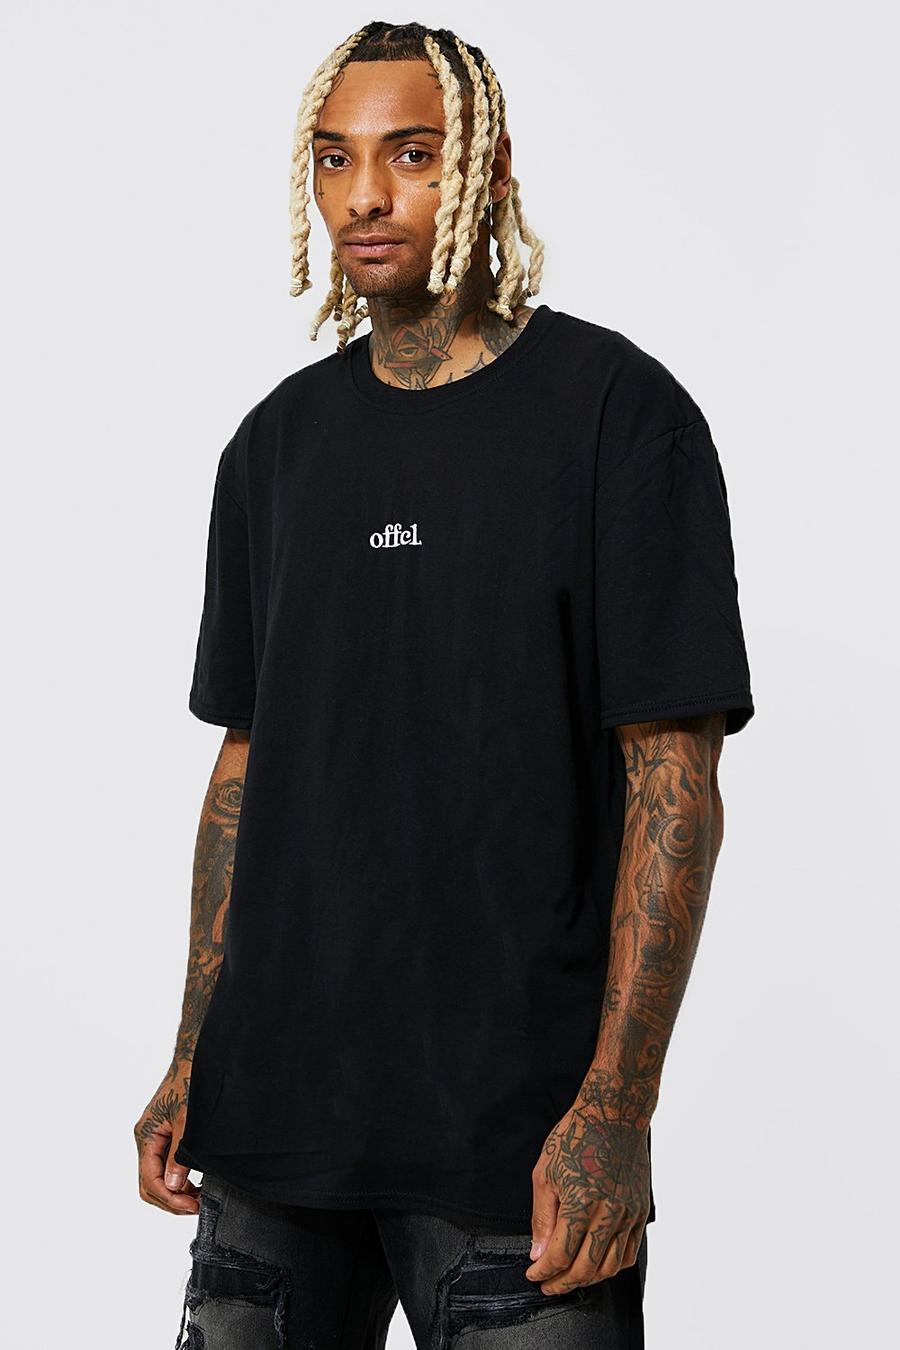 Black Oversized Offcl Embroidered T-shirt